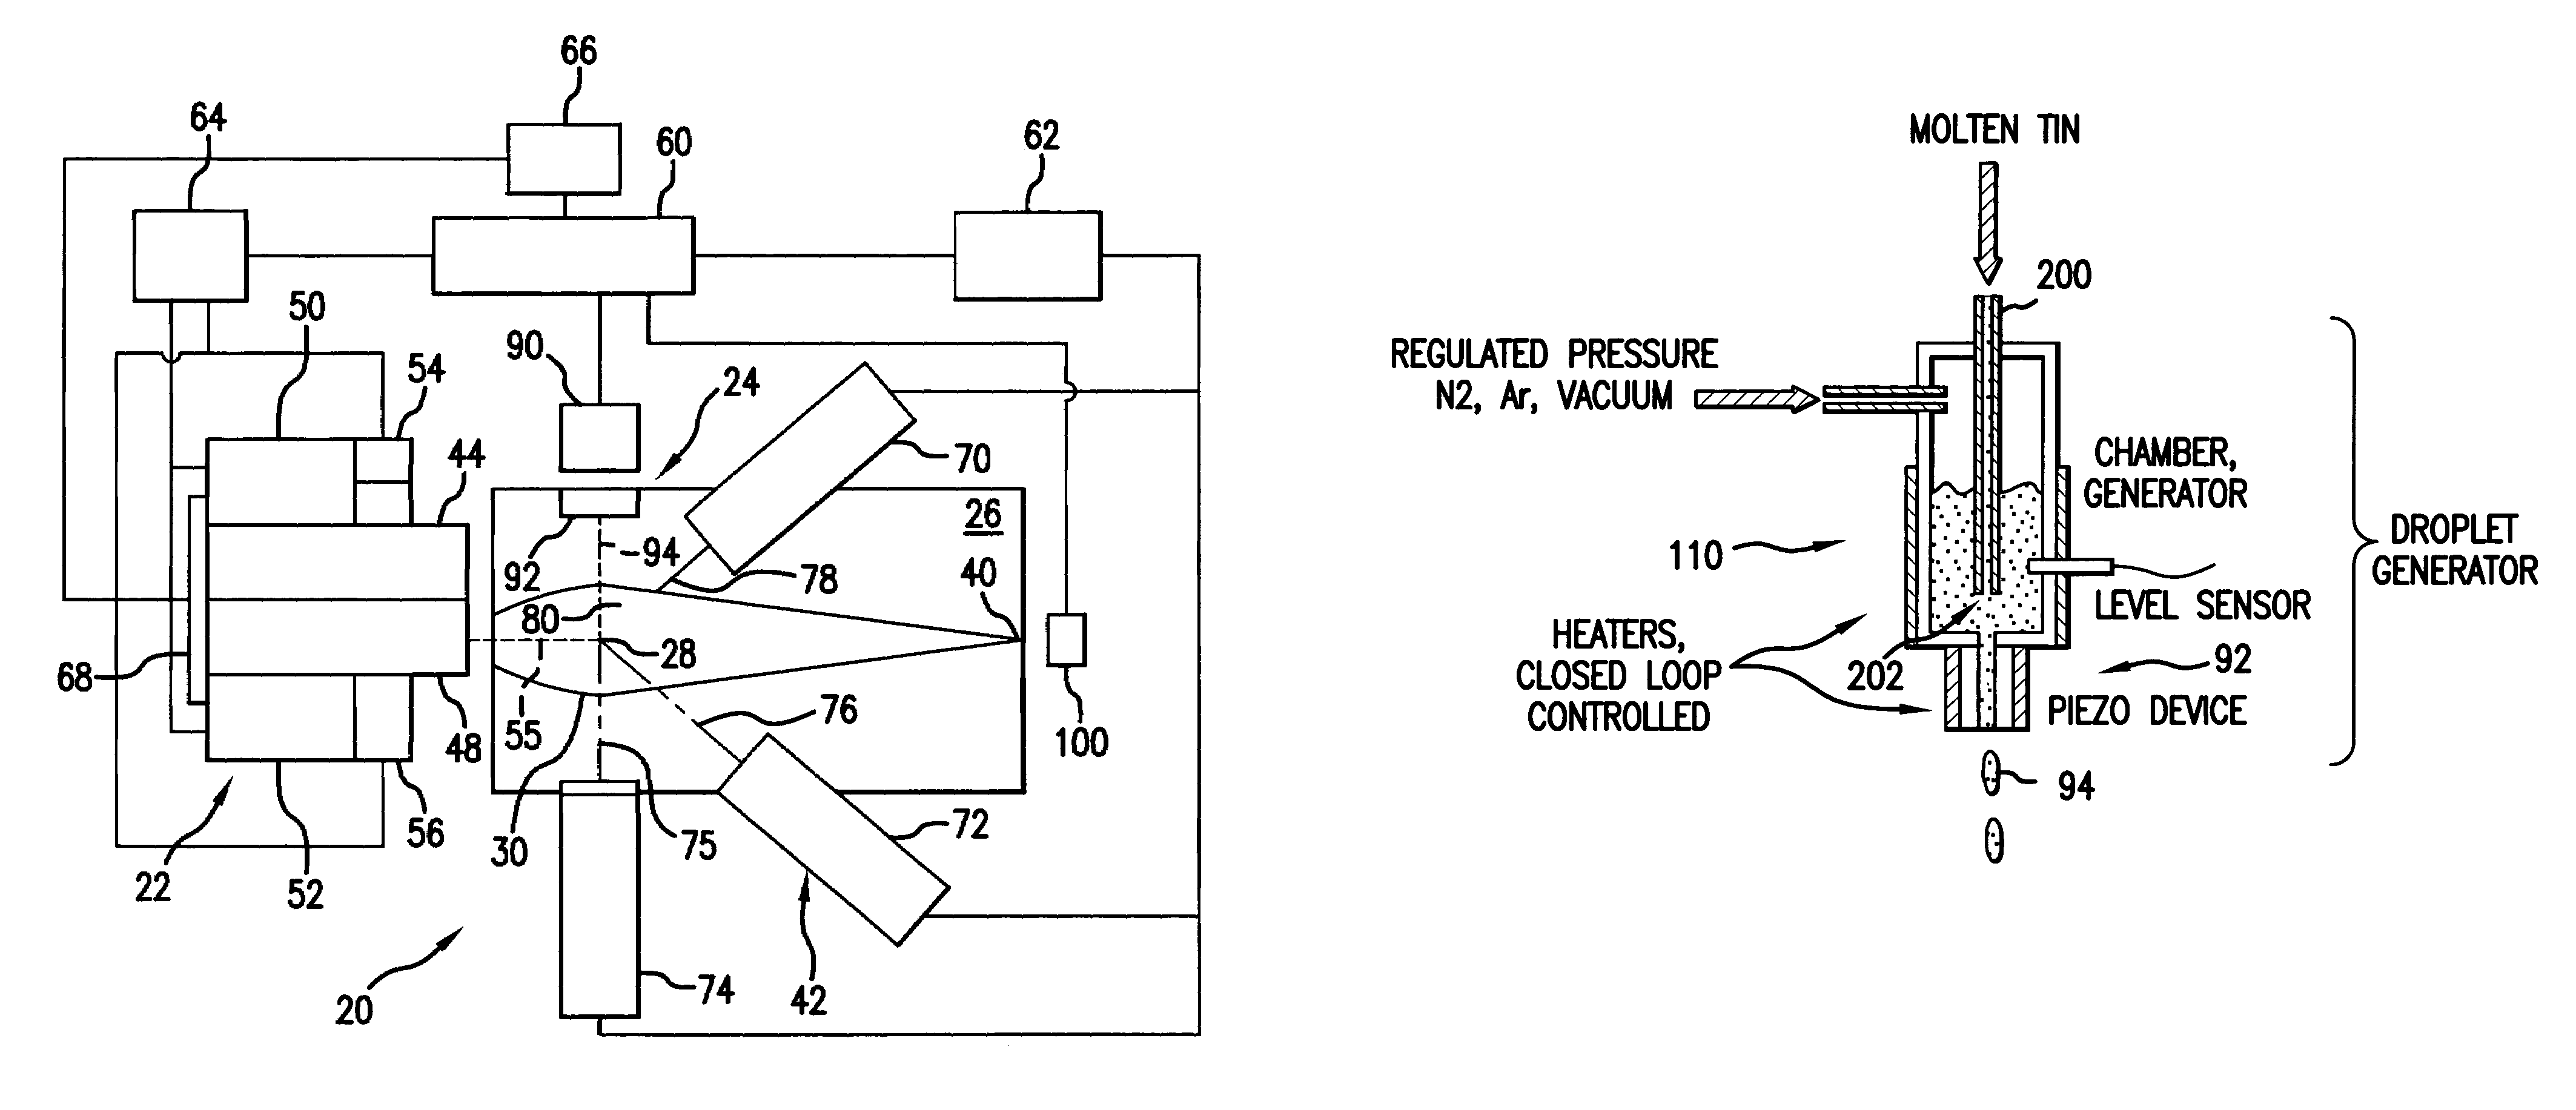 Method and apparatus for EUV light source target material handling